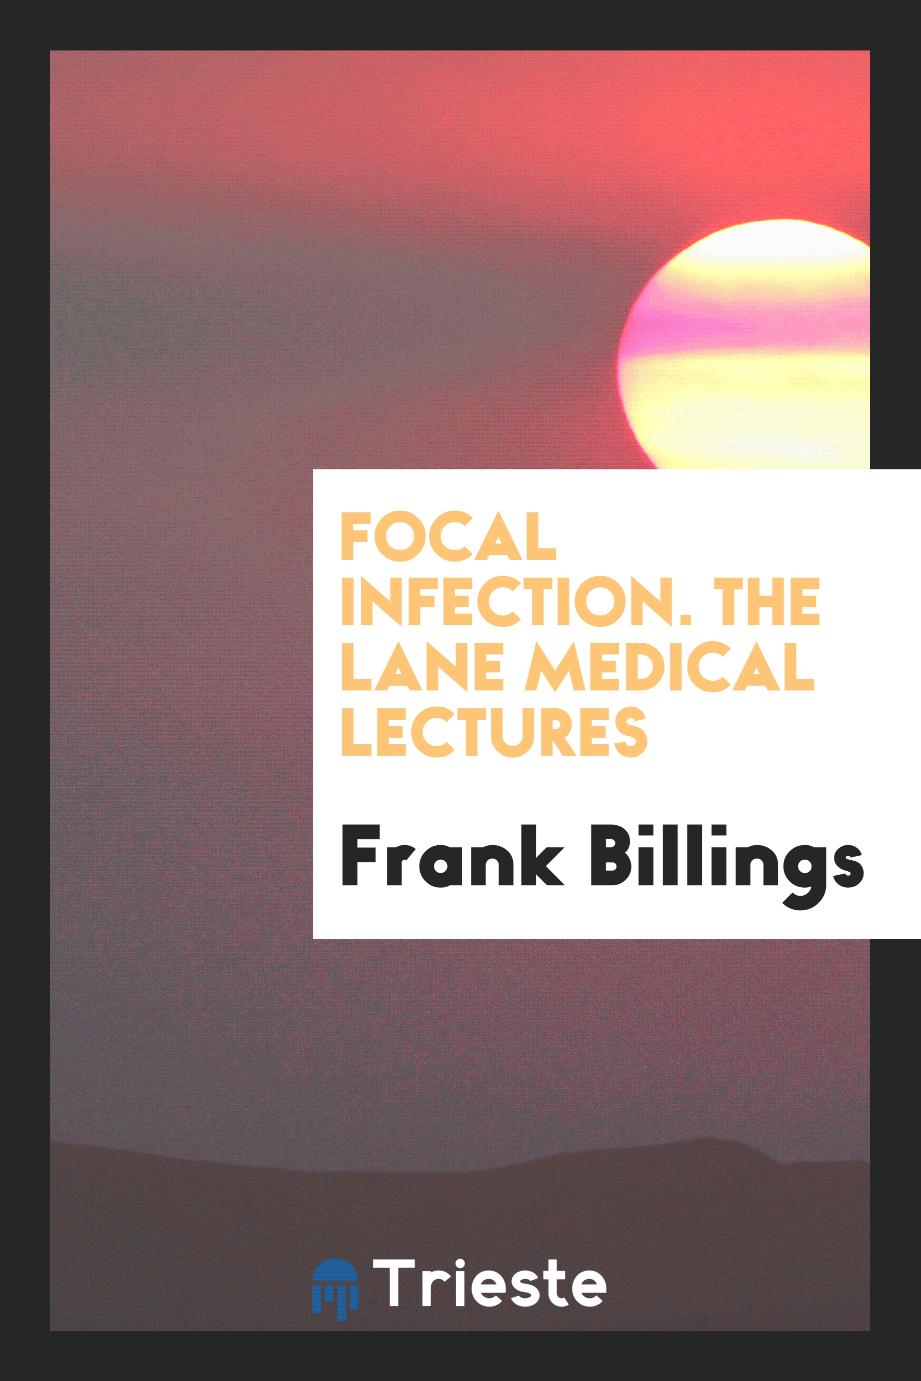 Focal Infection. The Lane Medical Lectures